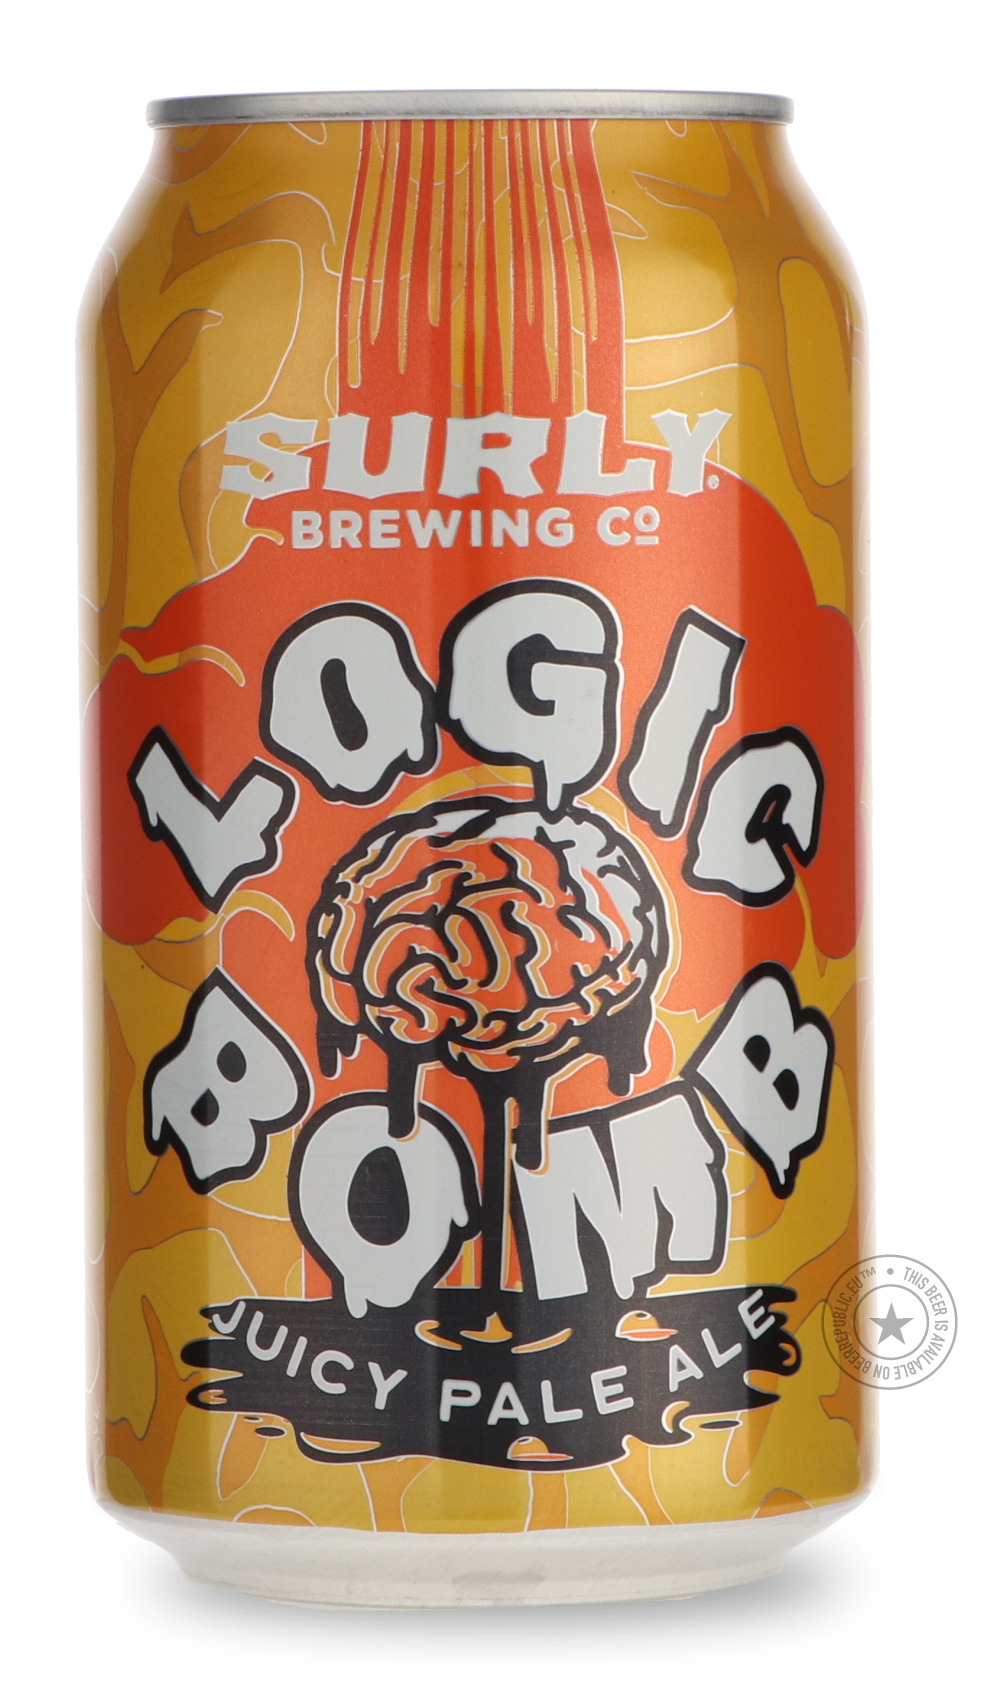 -Surly- Logic Bomb-Pale- Only @ Beer Republic - The best online beer store for American & Canadian craft beer - Buy beer online from the USA and Canada - Bier online kopen - Amerikaans bier kopen - Craft beer store - Craft beer kopen - Amerikanisch bier kaufen - Bier online kaufen - Acheter biere online - IPA - Stout - Porter - New England IPA - Hazy IPA - Imperial Stout - Barrel Aged - Barrel Aged Imperial Stout - Brown - Dark beer - Blond - Blonde - Pilsner - Lager - Wheat - Weizen - Amber - Barley Wine -